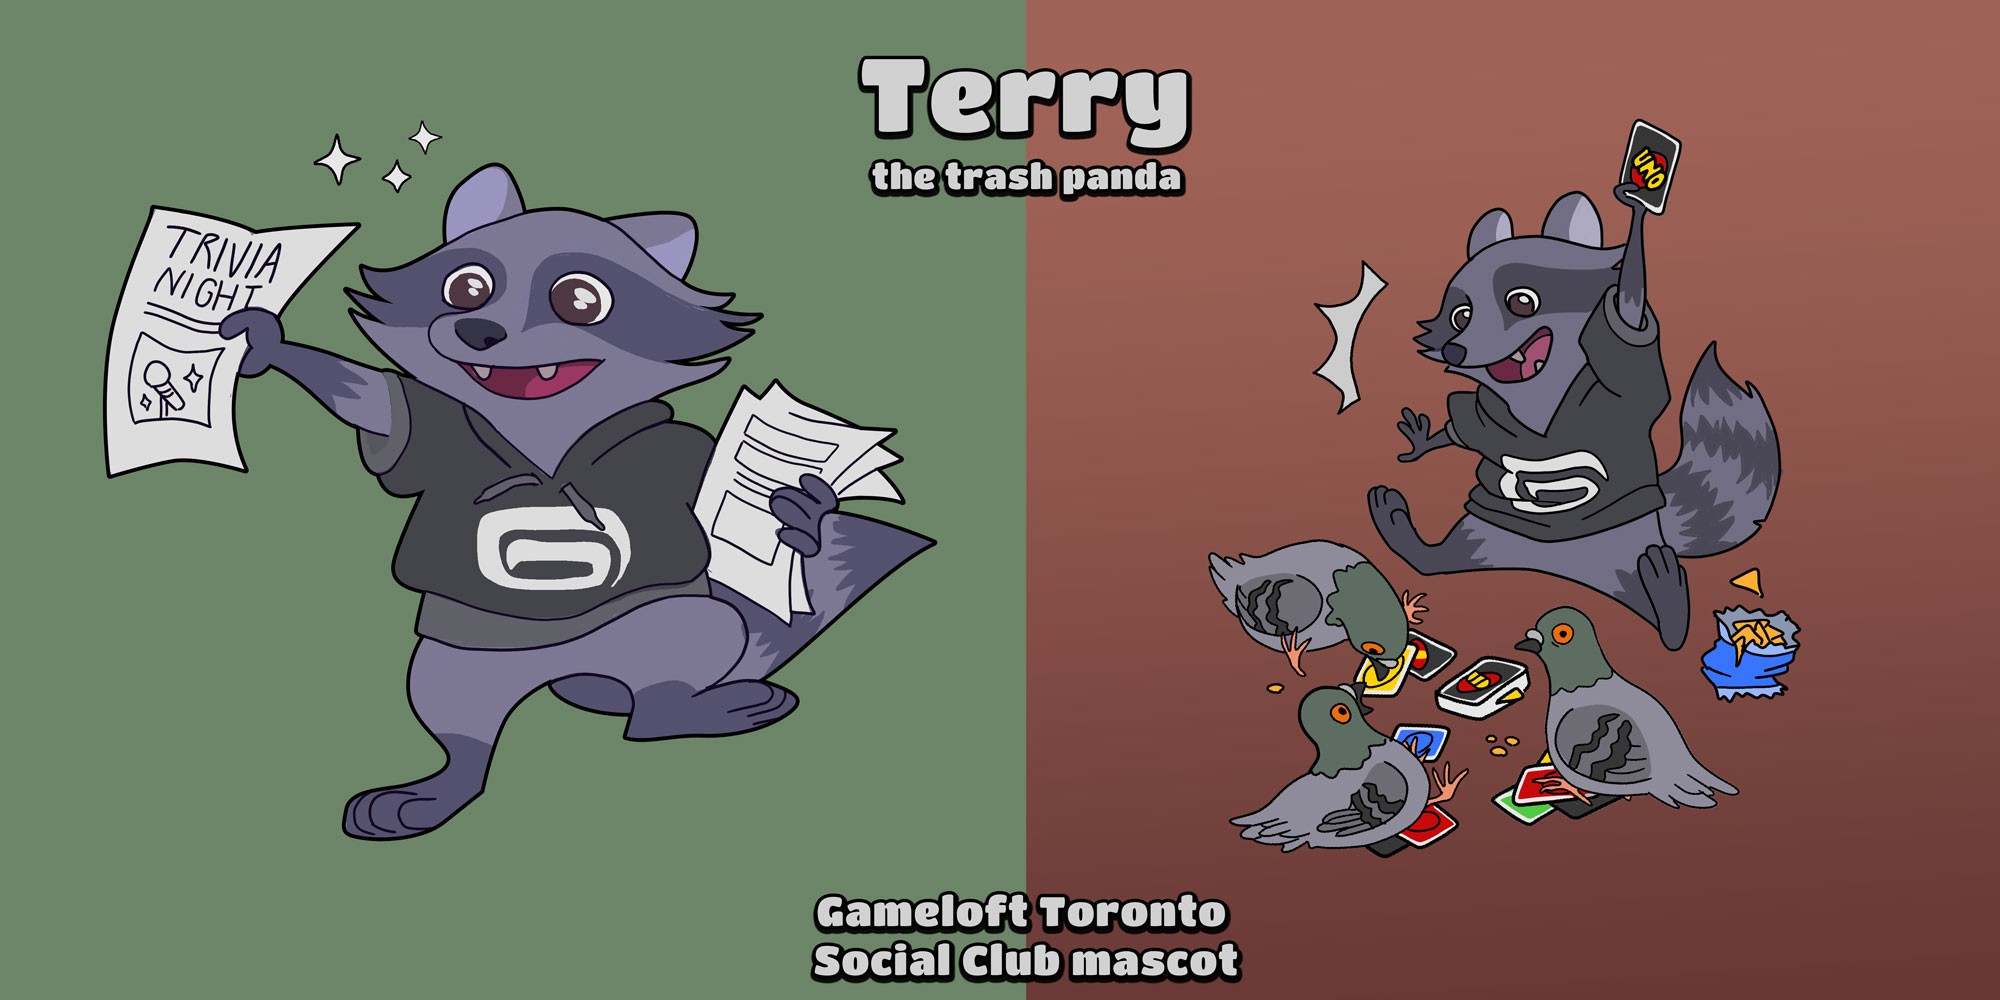 Terry the Trashpanda, depicted handing out flyers and playing Uno with Pigeons